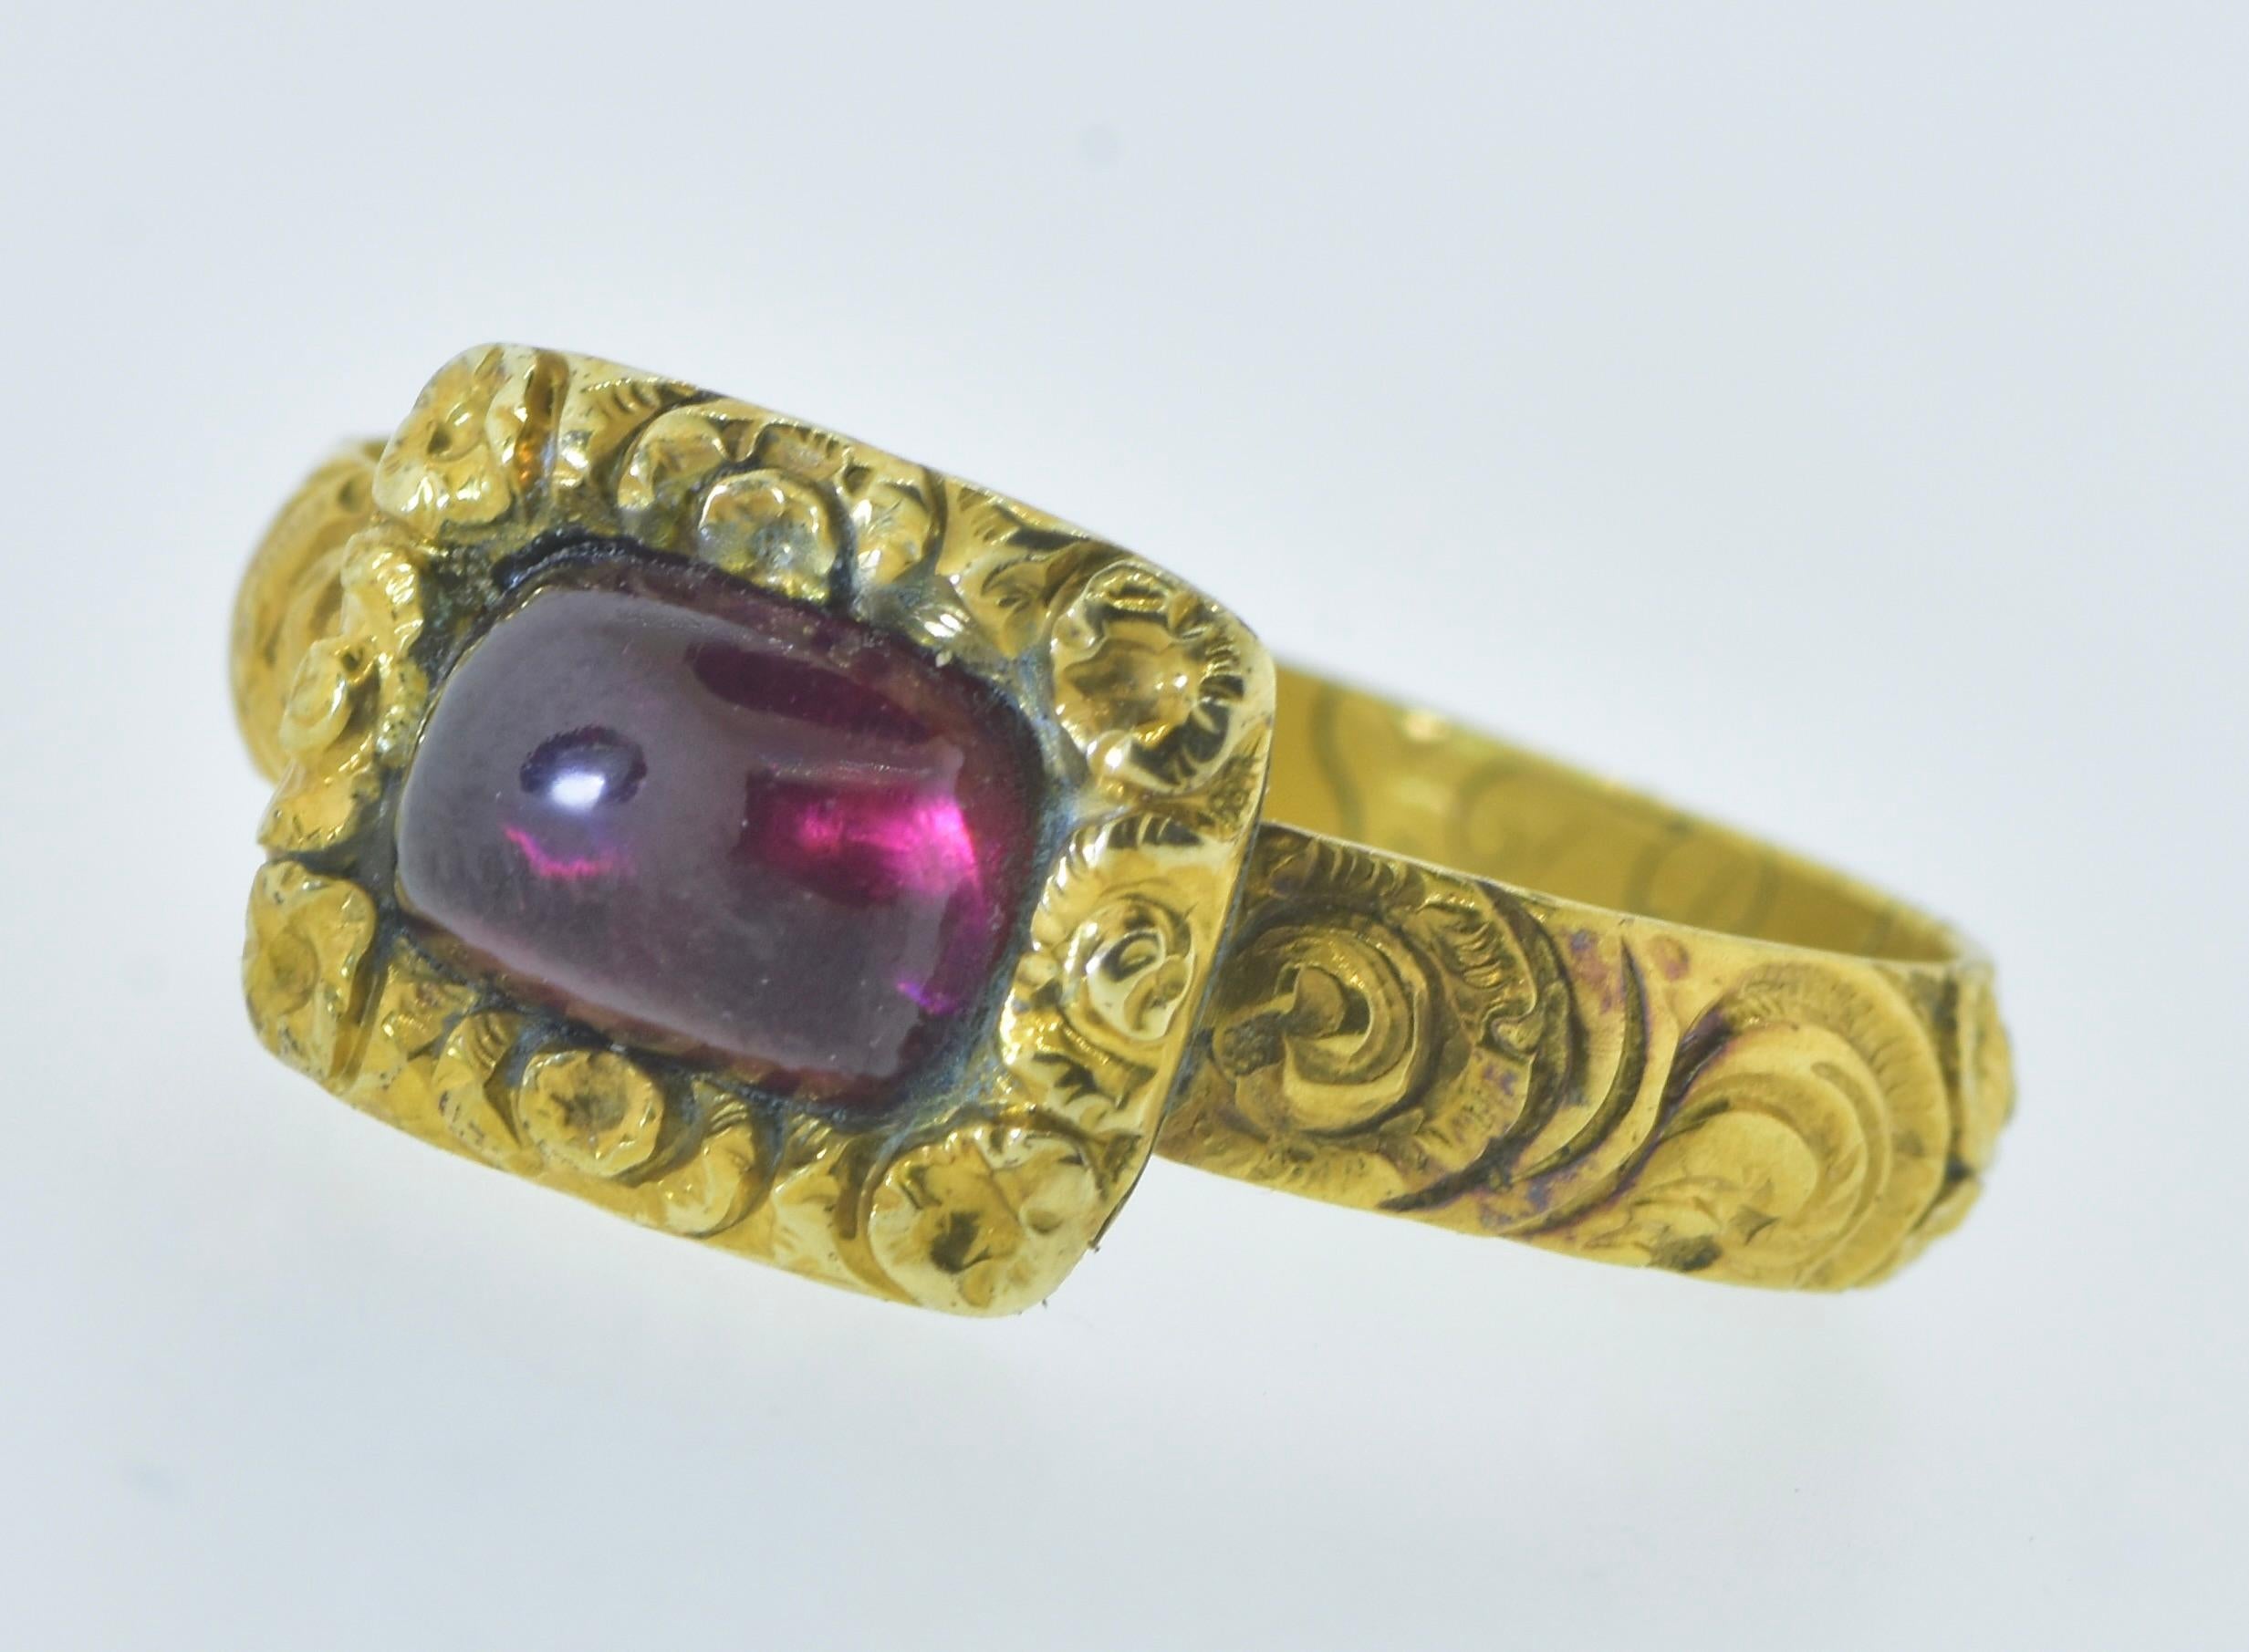 Antique 18K yellow gold and garnet ring, exquisitely engraved in the interior of the band: Thomas Nixon lived Nov 1712 -Oct. 65.  This yellow gold ring is in excellent condition as evident of the fine crisp chased repousse work and the legibility of